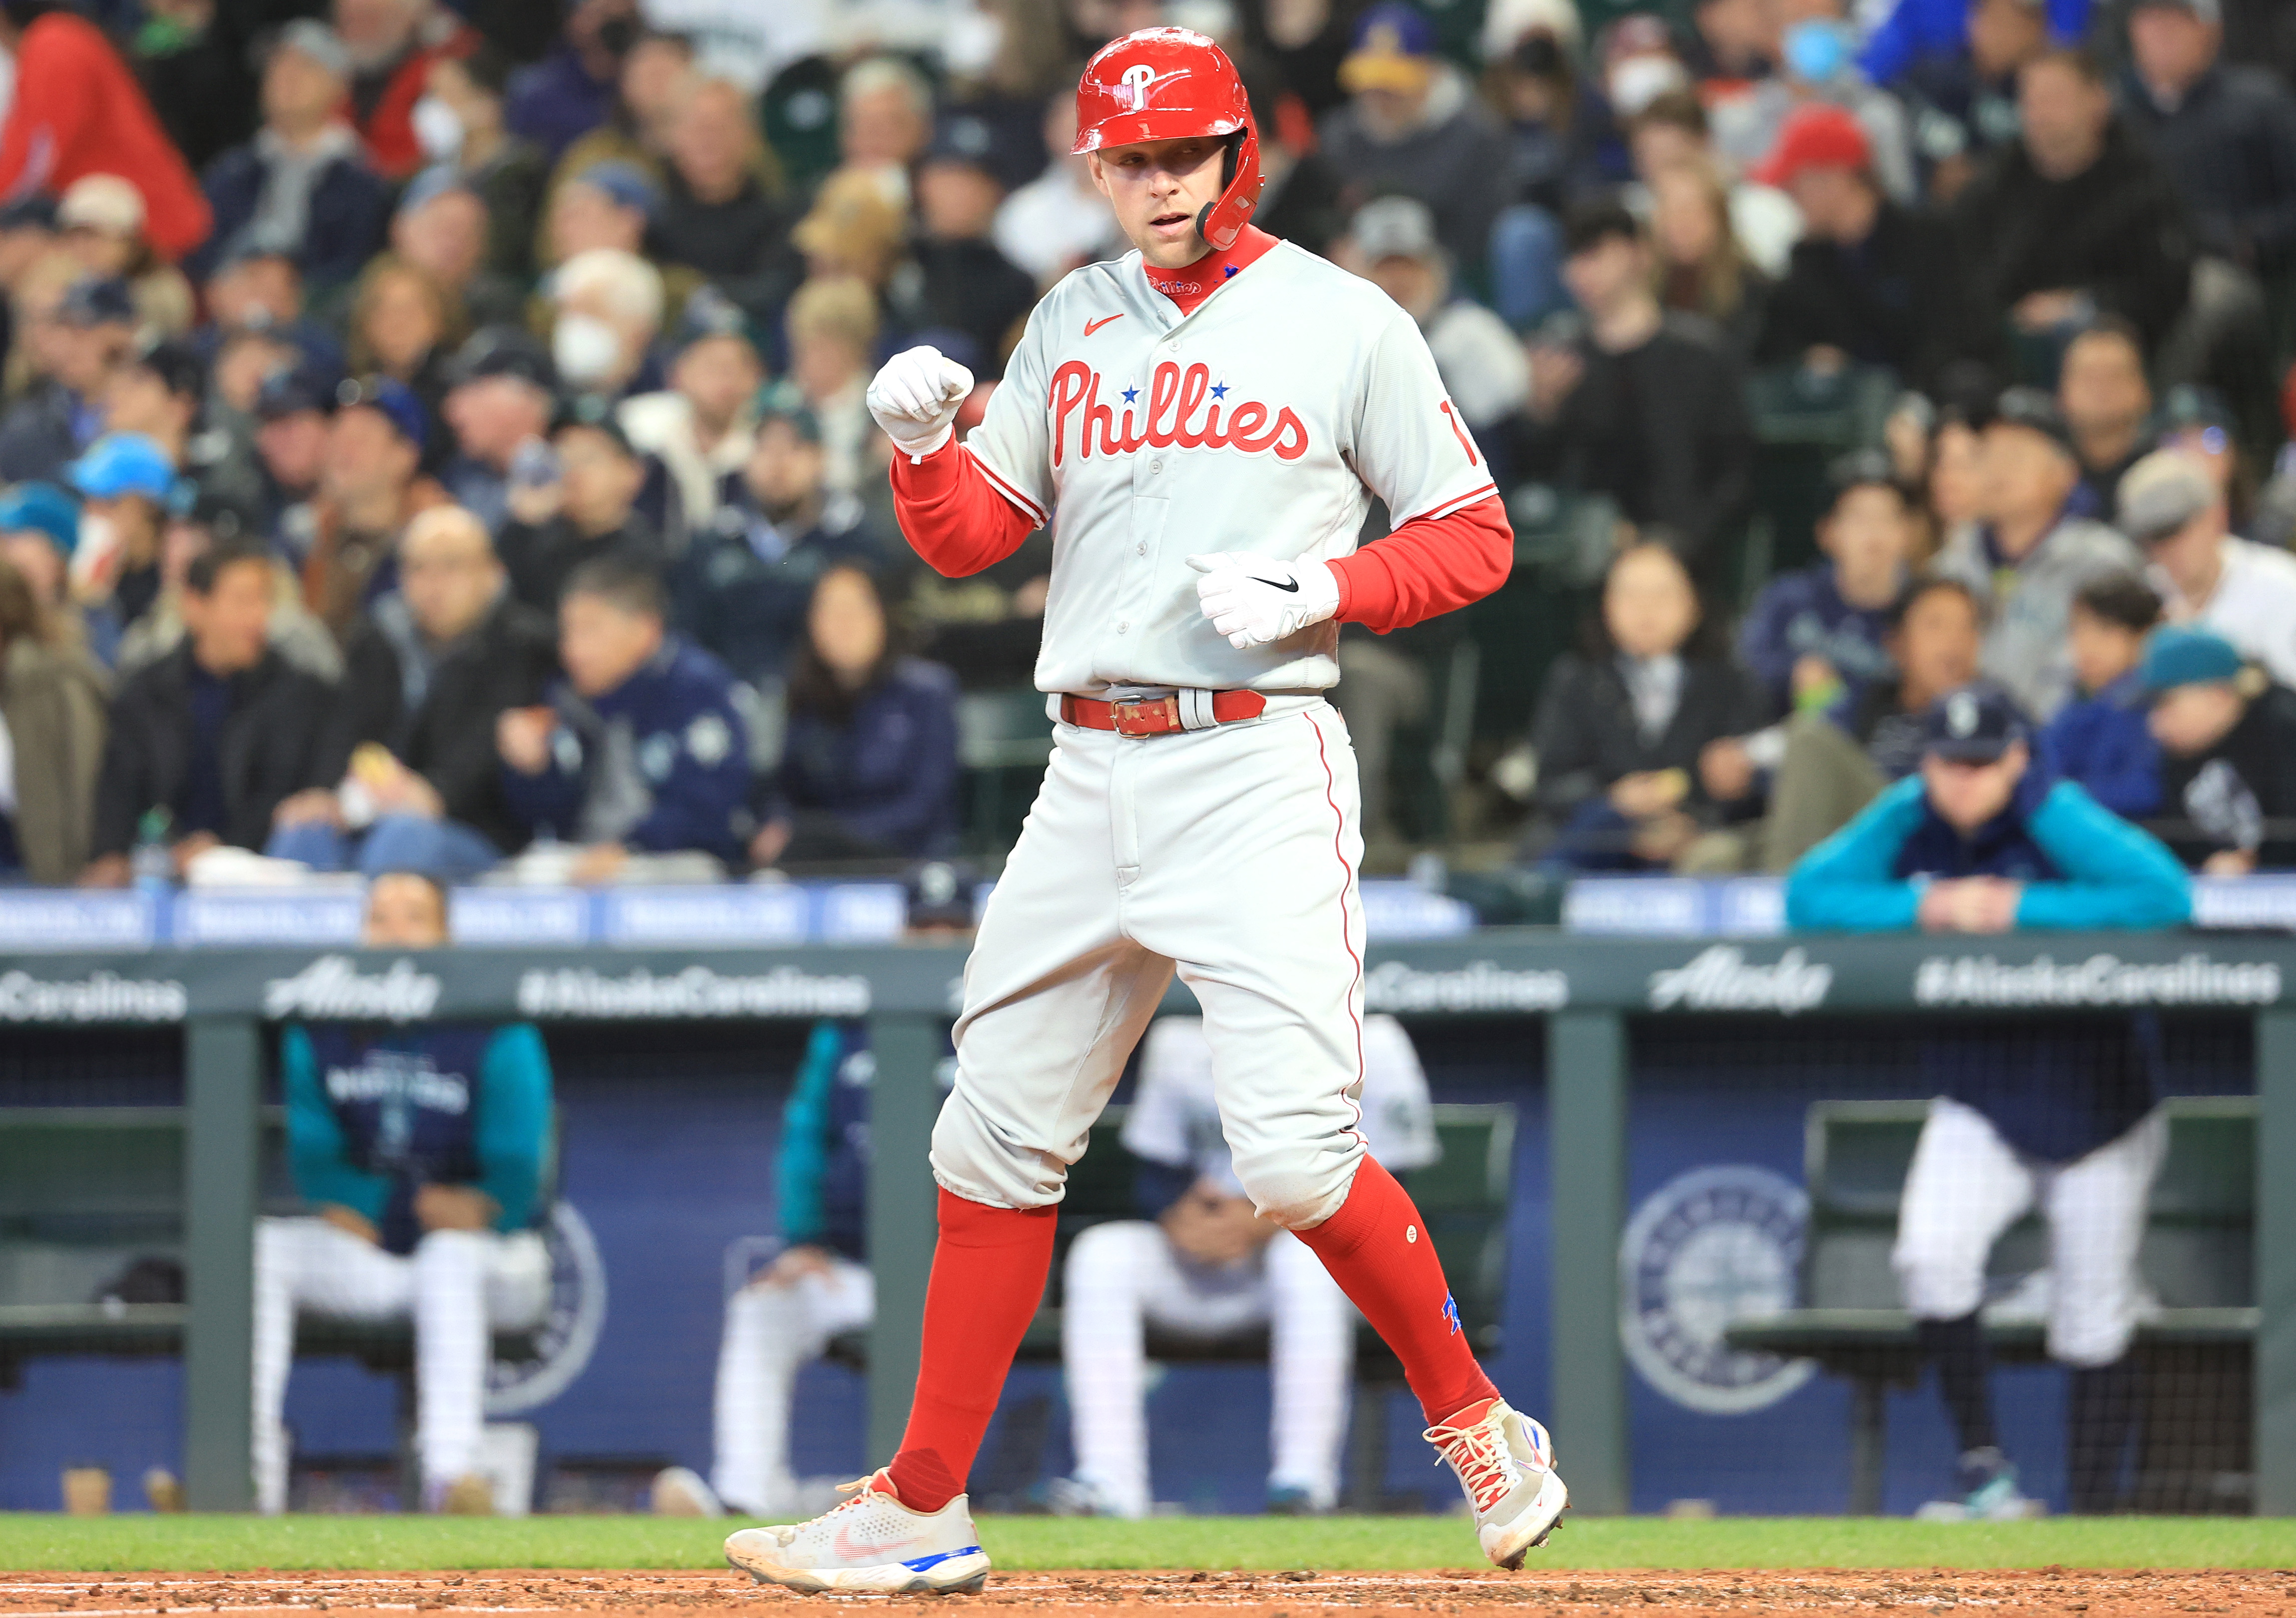 A2D Radio - Joe Girardi says J.T. Realmuto suffered a bruised muscle in his  left knee. The Philadelphia Phillies manager doesn't believe the All-Star  catcher will be put on the IL. Per